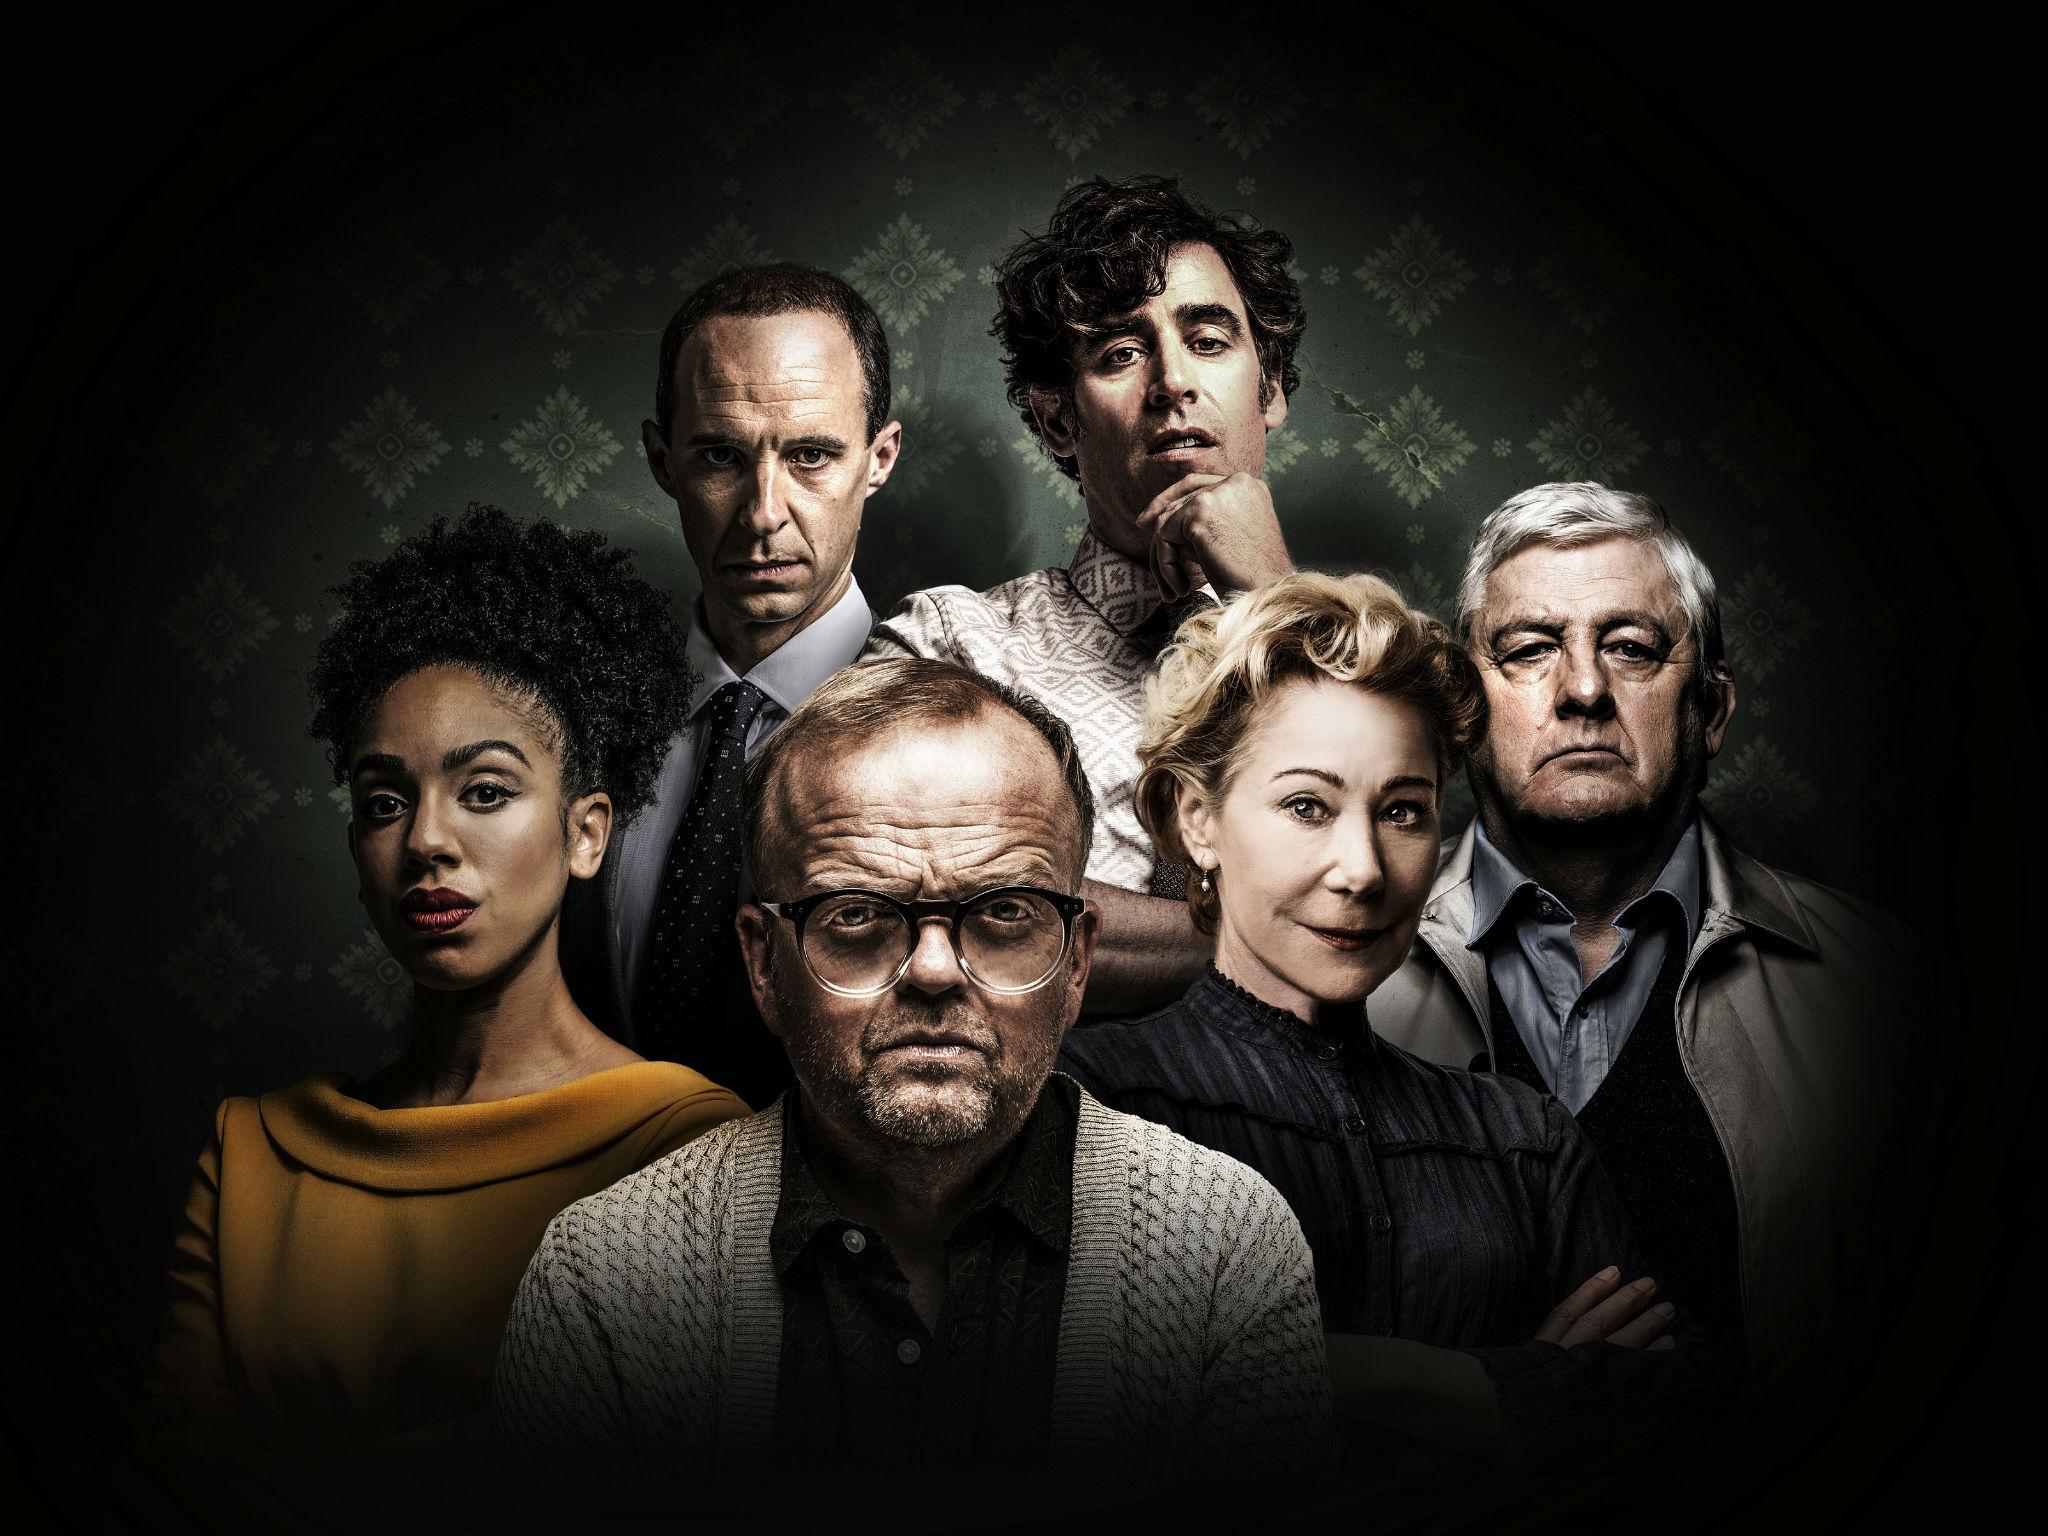 Toby Jones, Zoë Wanamaker and Stephen Mangan lead the cast in Pinter’s ‘The Birthday Party’ in London from 9 January